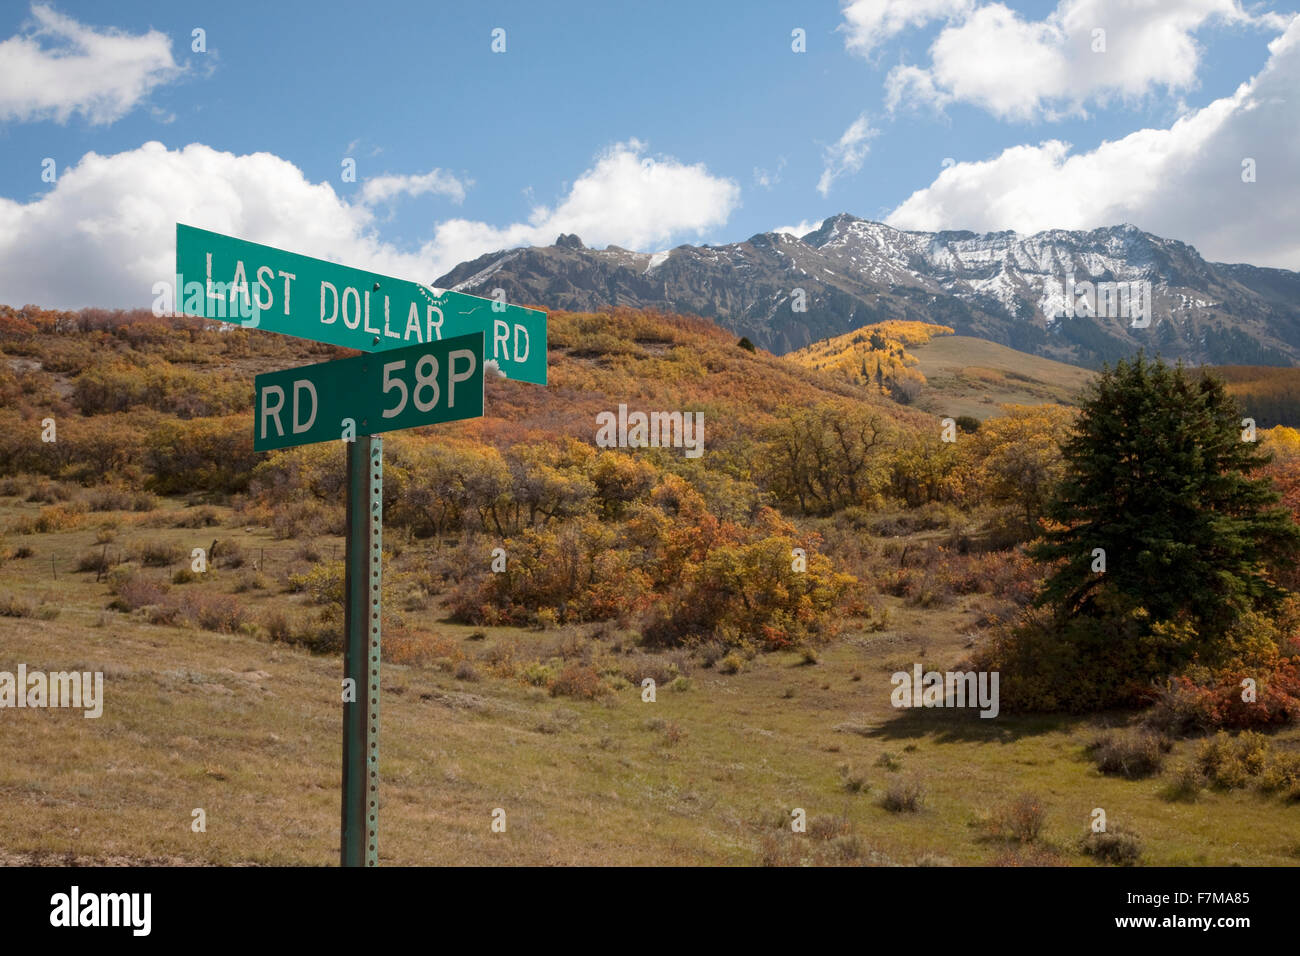 Road sign for 'Last Dollar Road' and San Juan Mountains, Ridgeway, CO Stock Photo